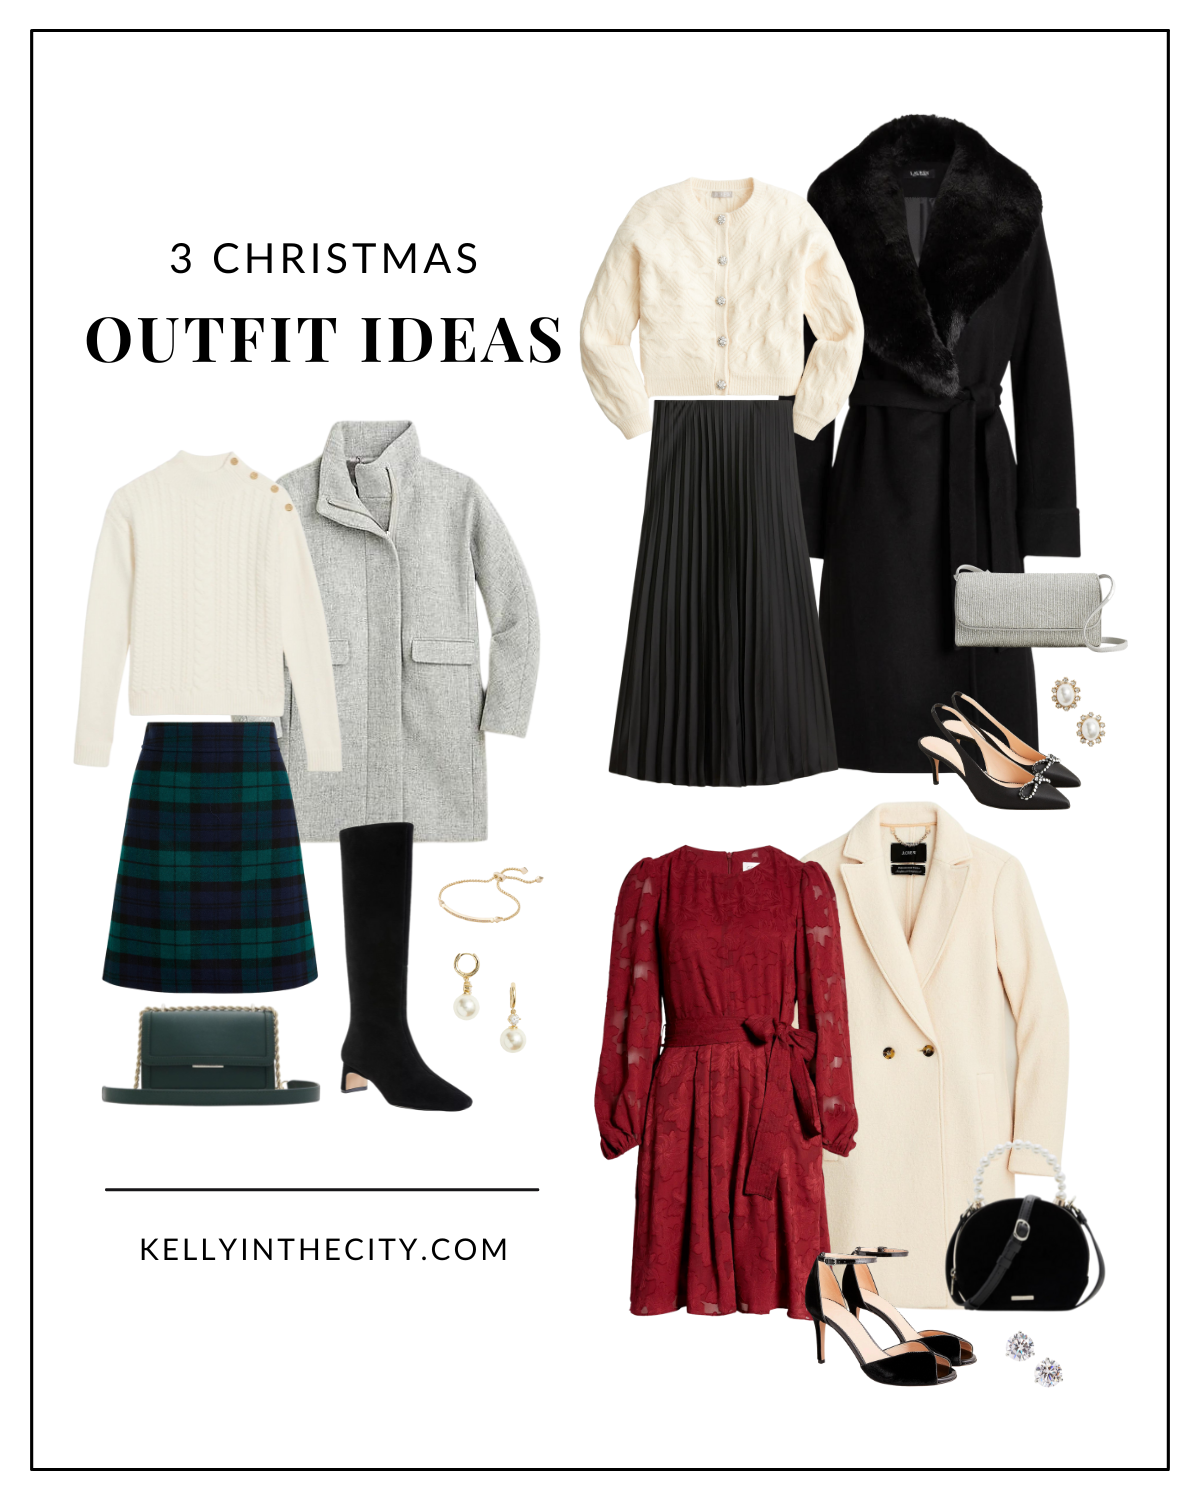 25 Christmas Party Outfit Ideas for Your Holiday Gatherings